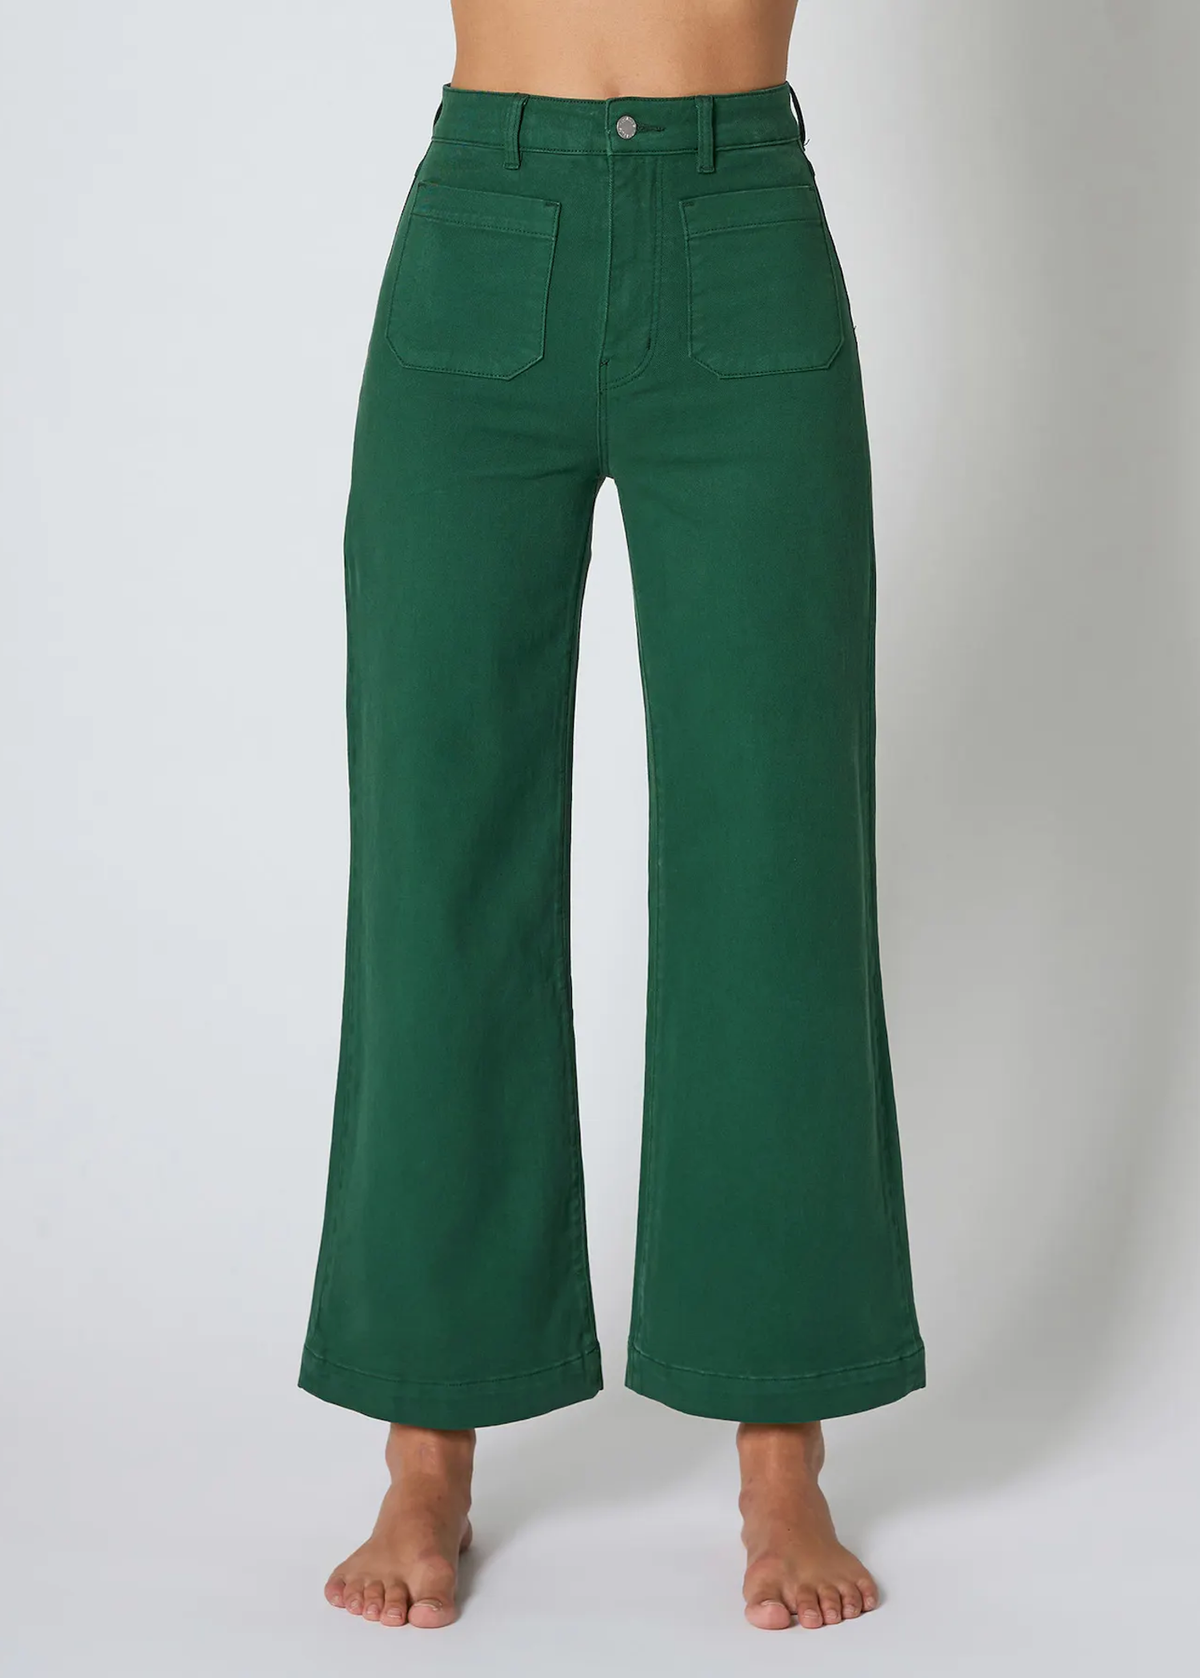 70s inspired high rise waist stretch cotton basil green sailor wide leg crop pant jean by Rolla's Jeans